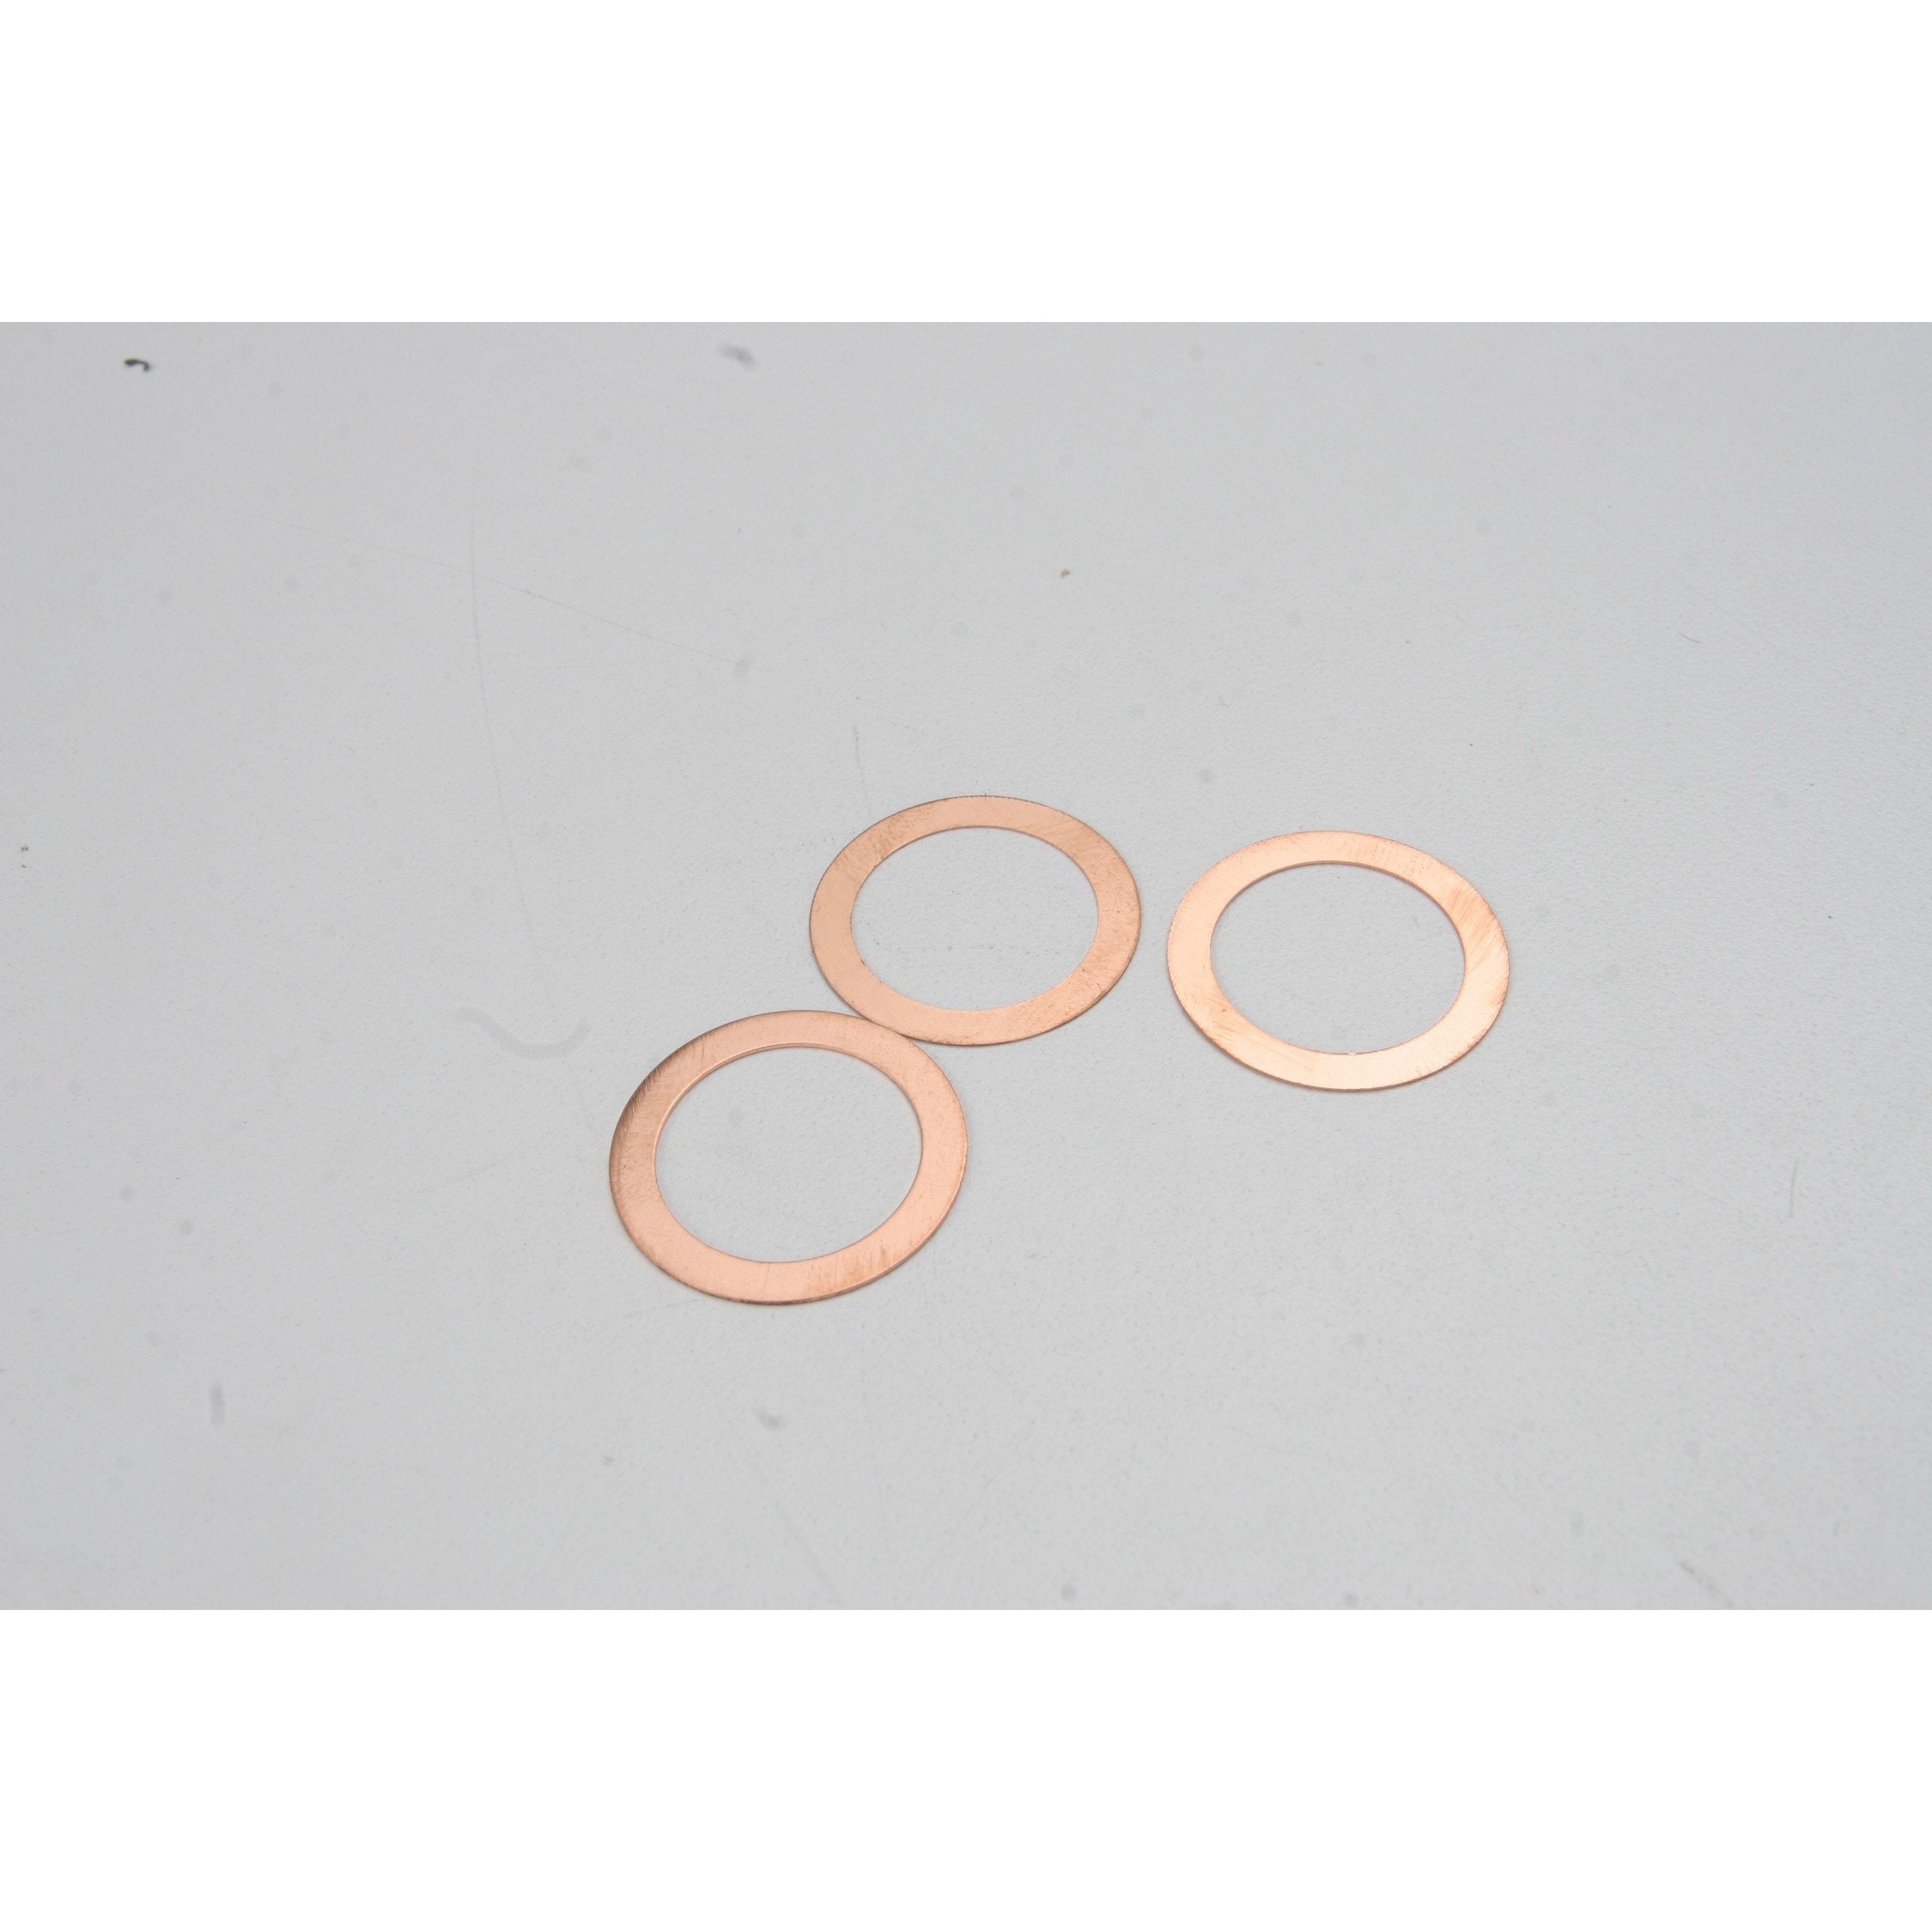 TRA5292 Gaskets, cooling head: 0.20, 0.30, 0.40mm (1 each) (0.30mm stock) (TRX 3.3)